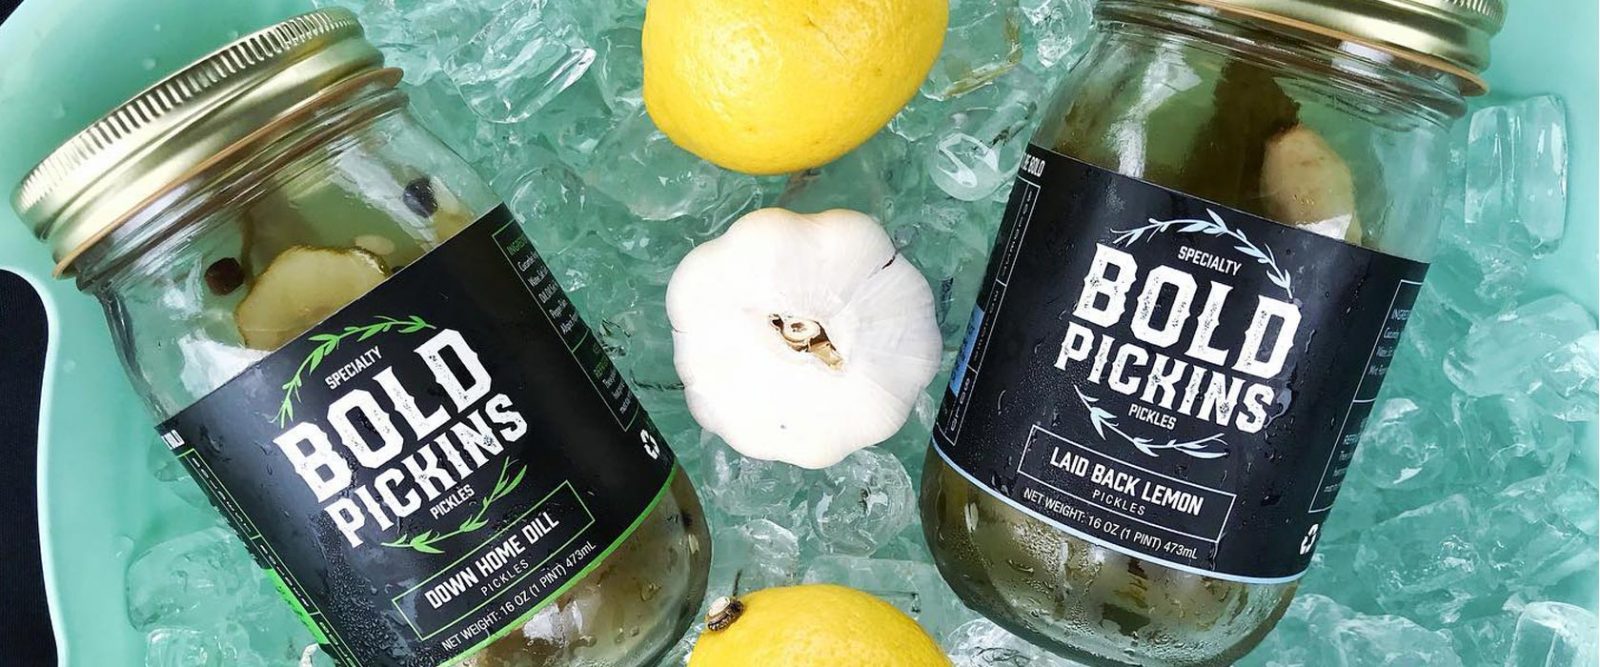 Two jars of Bold Pickin’s refrigerator pickles rising on a bed of ice with a head of garlic and two lemons